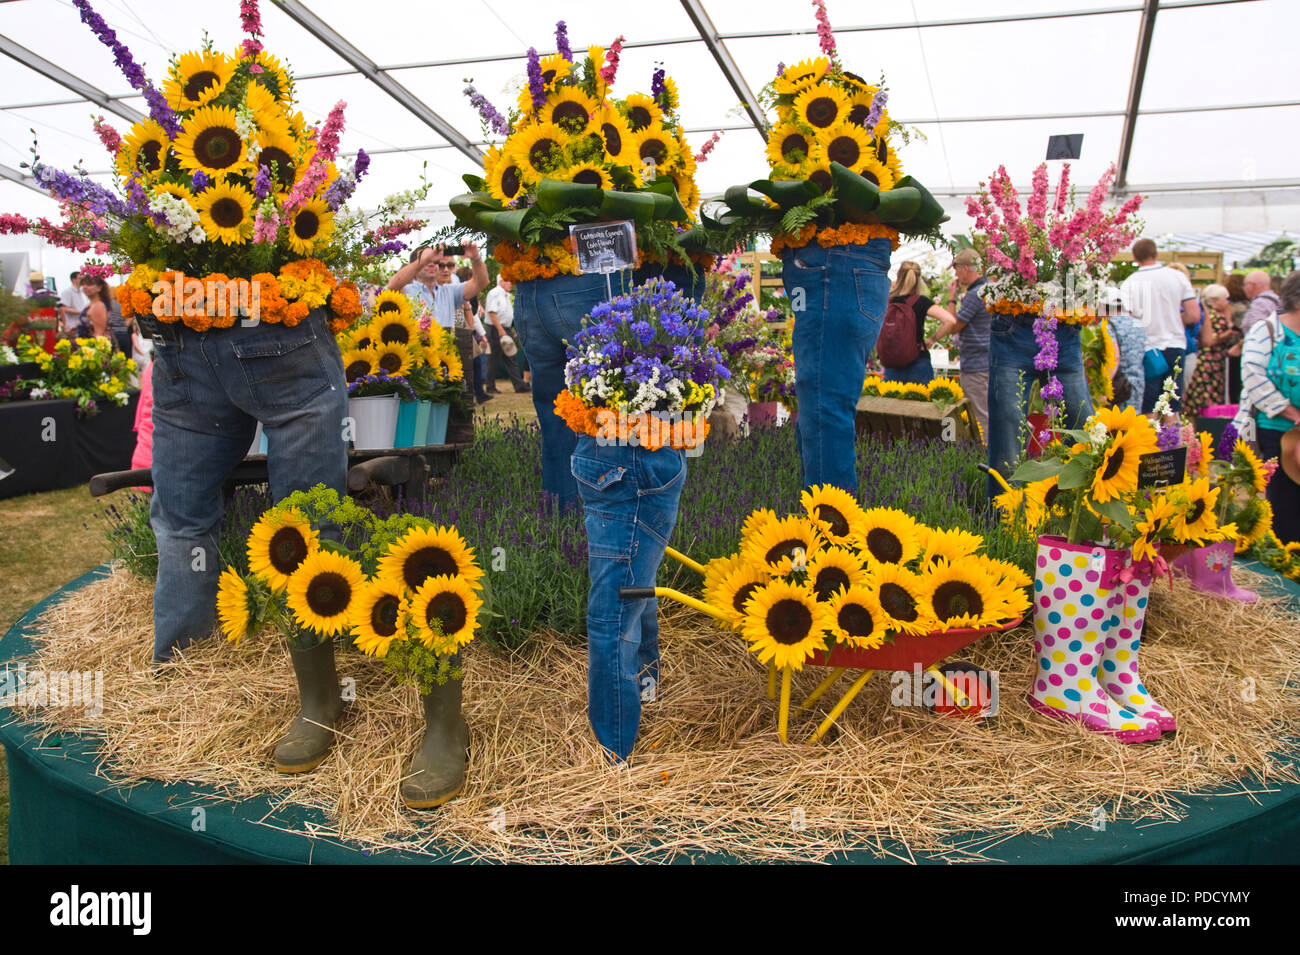 Display of sunflowers in unusual growing containers at RHS Tatton Park flower show Cheshire England UK Stock Photo